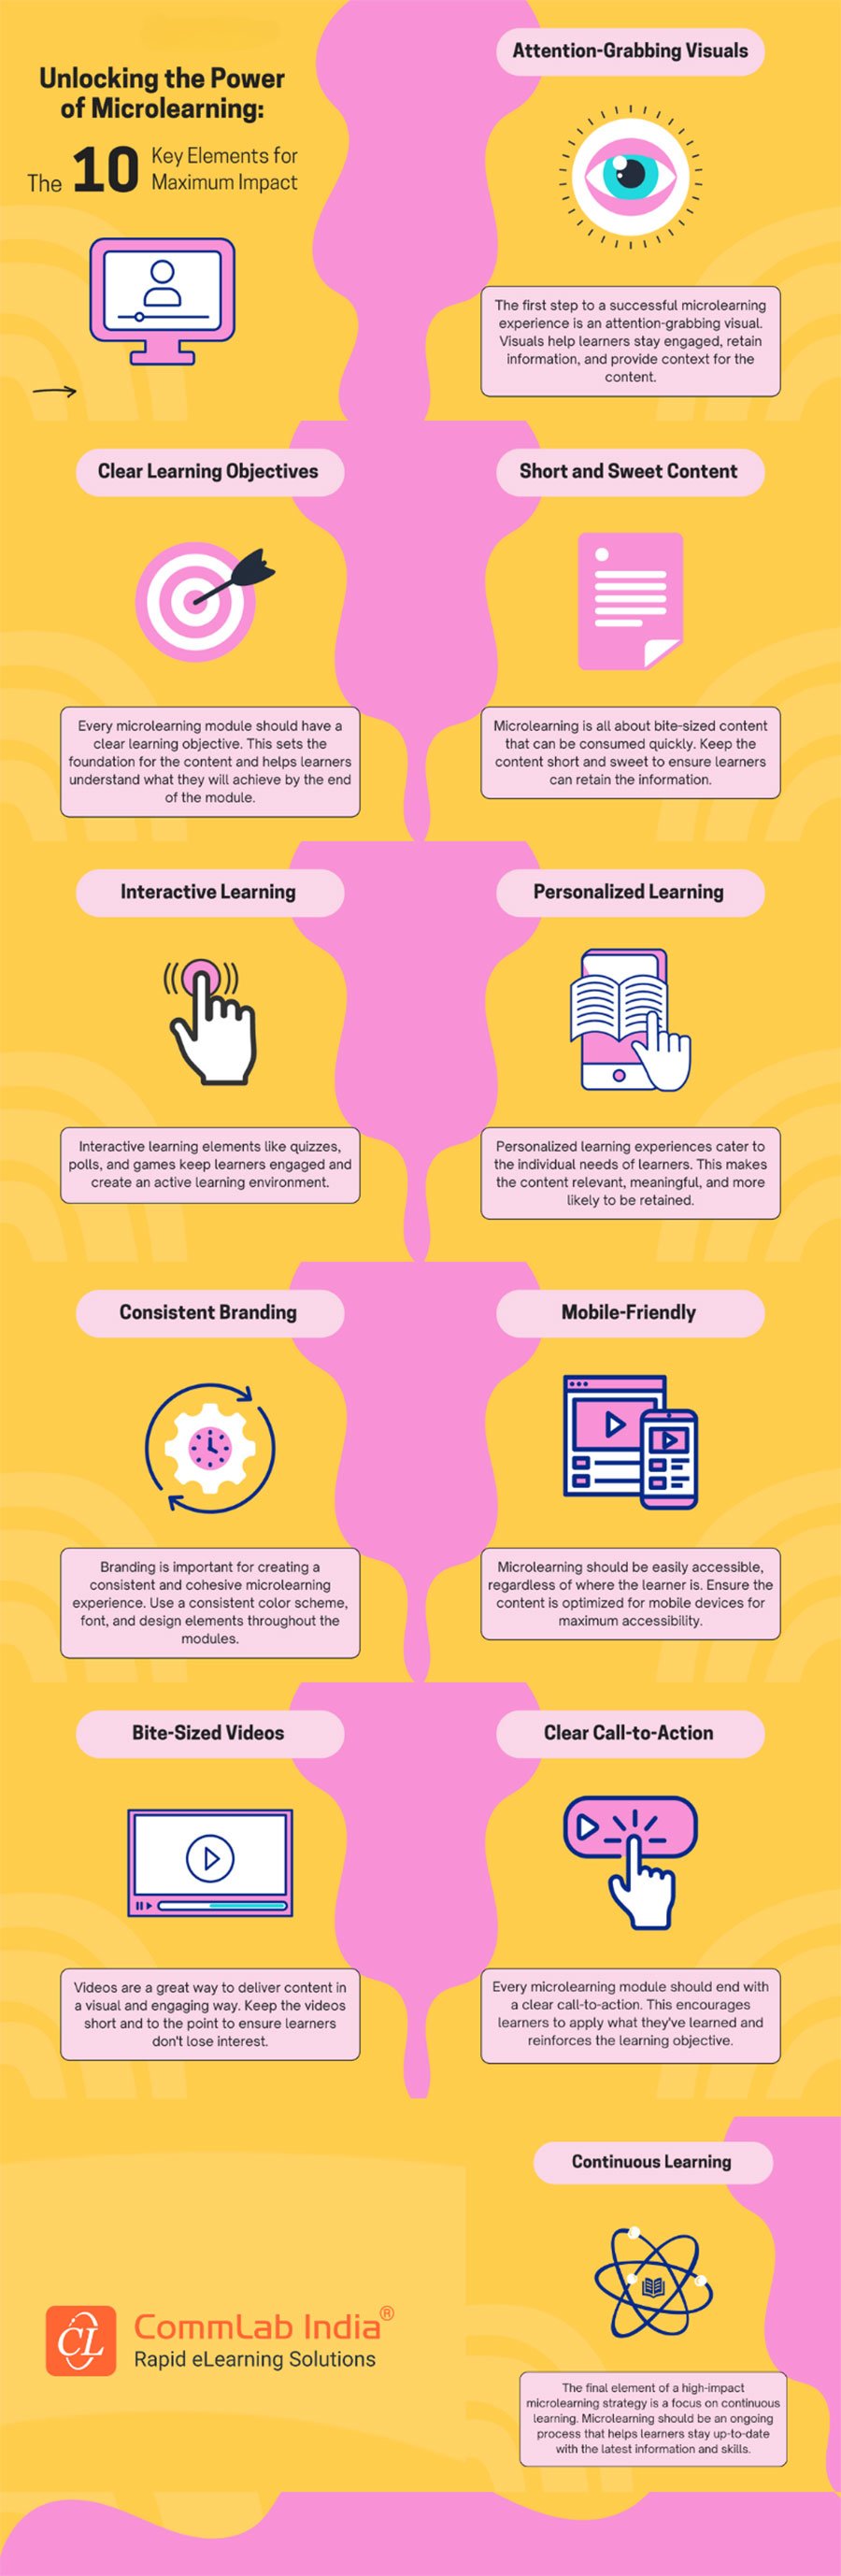 Key Elements of Microlearning